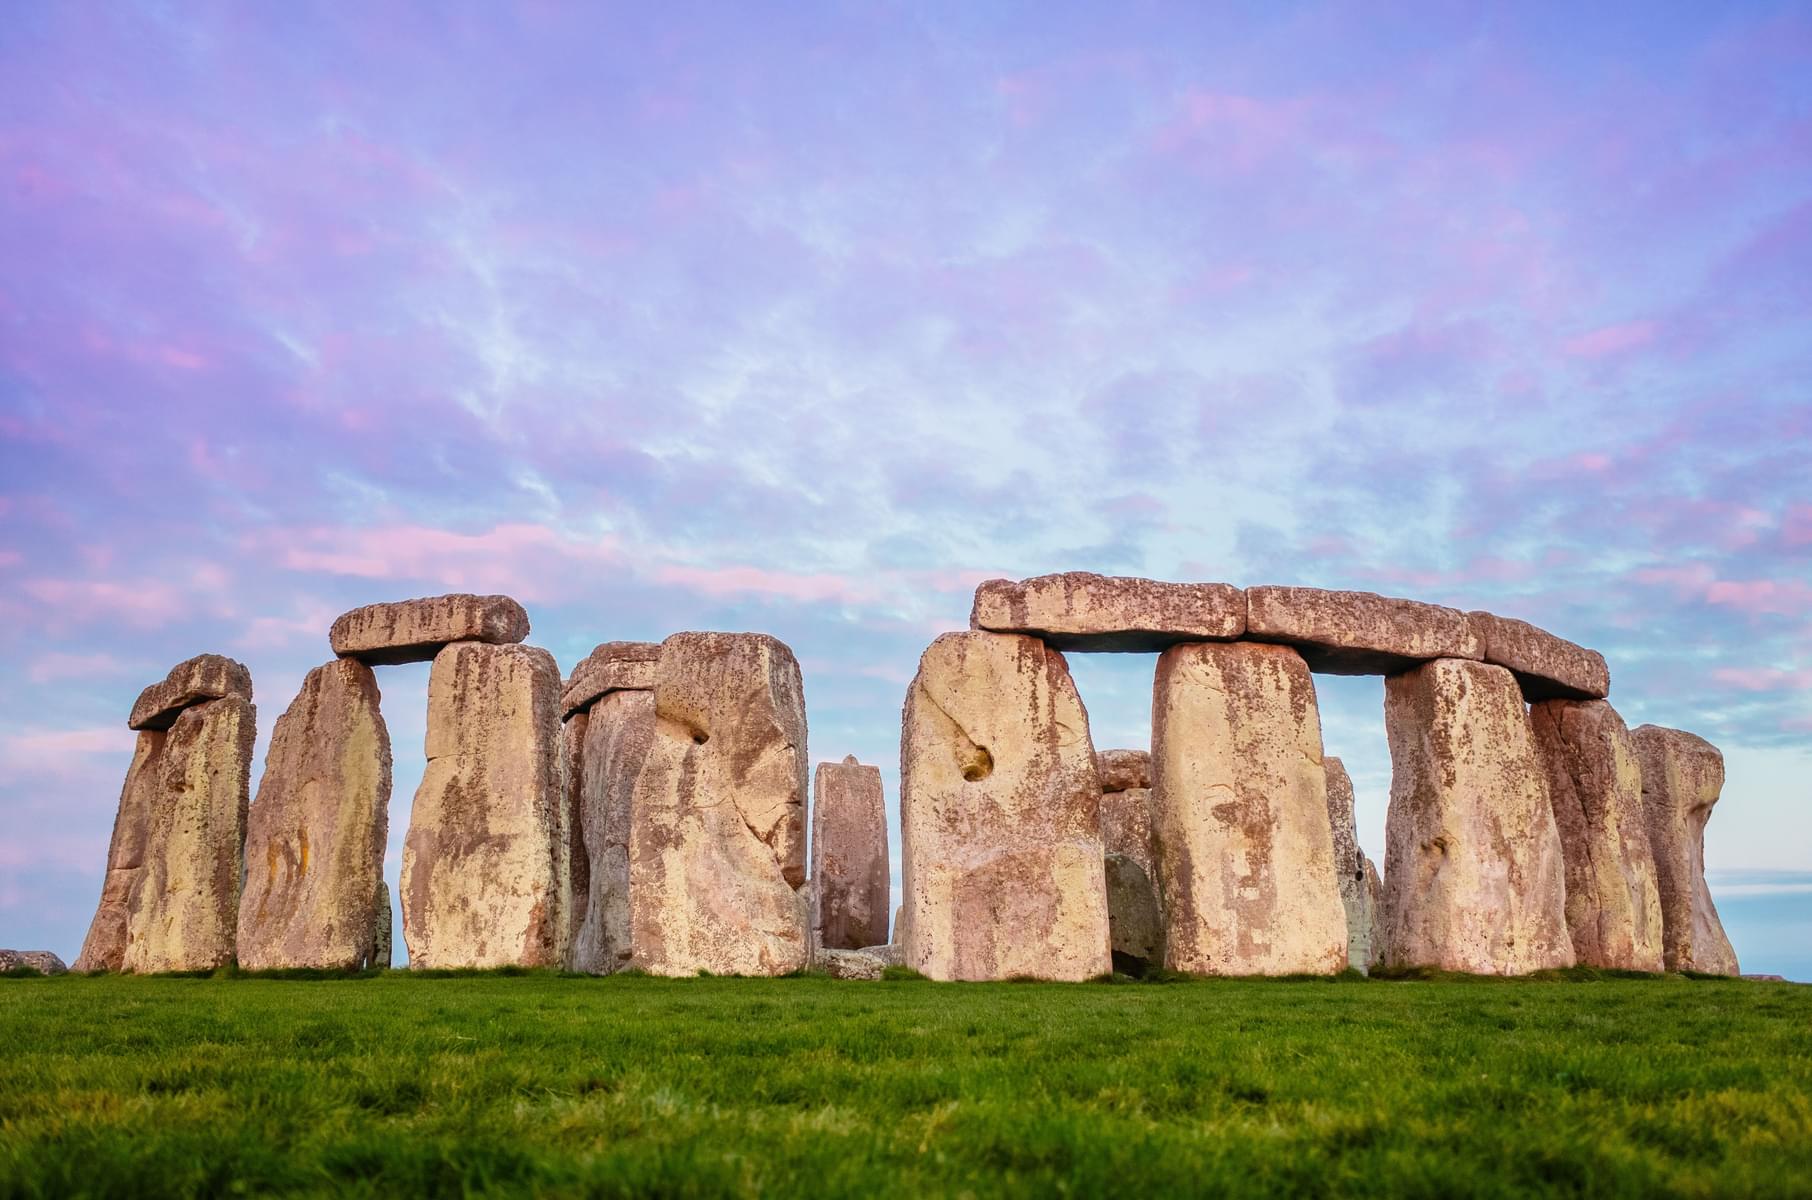 Essential Information About Stonehenge